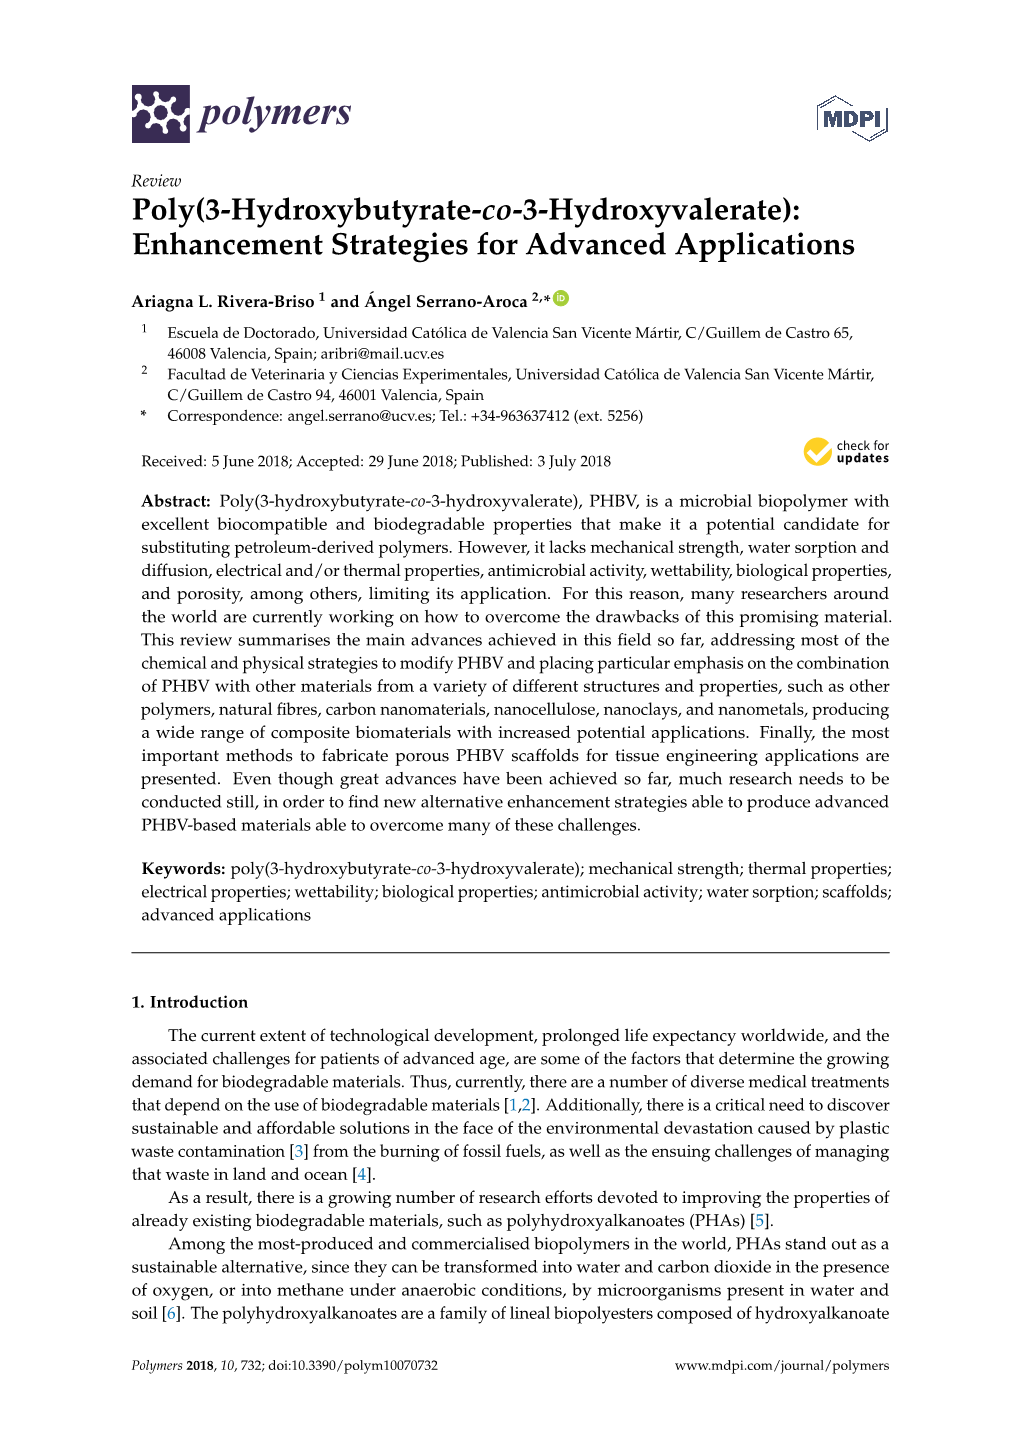 Enhancement Strategies for Advanced Applications